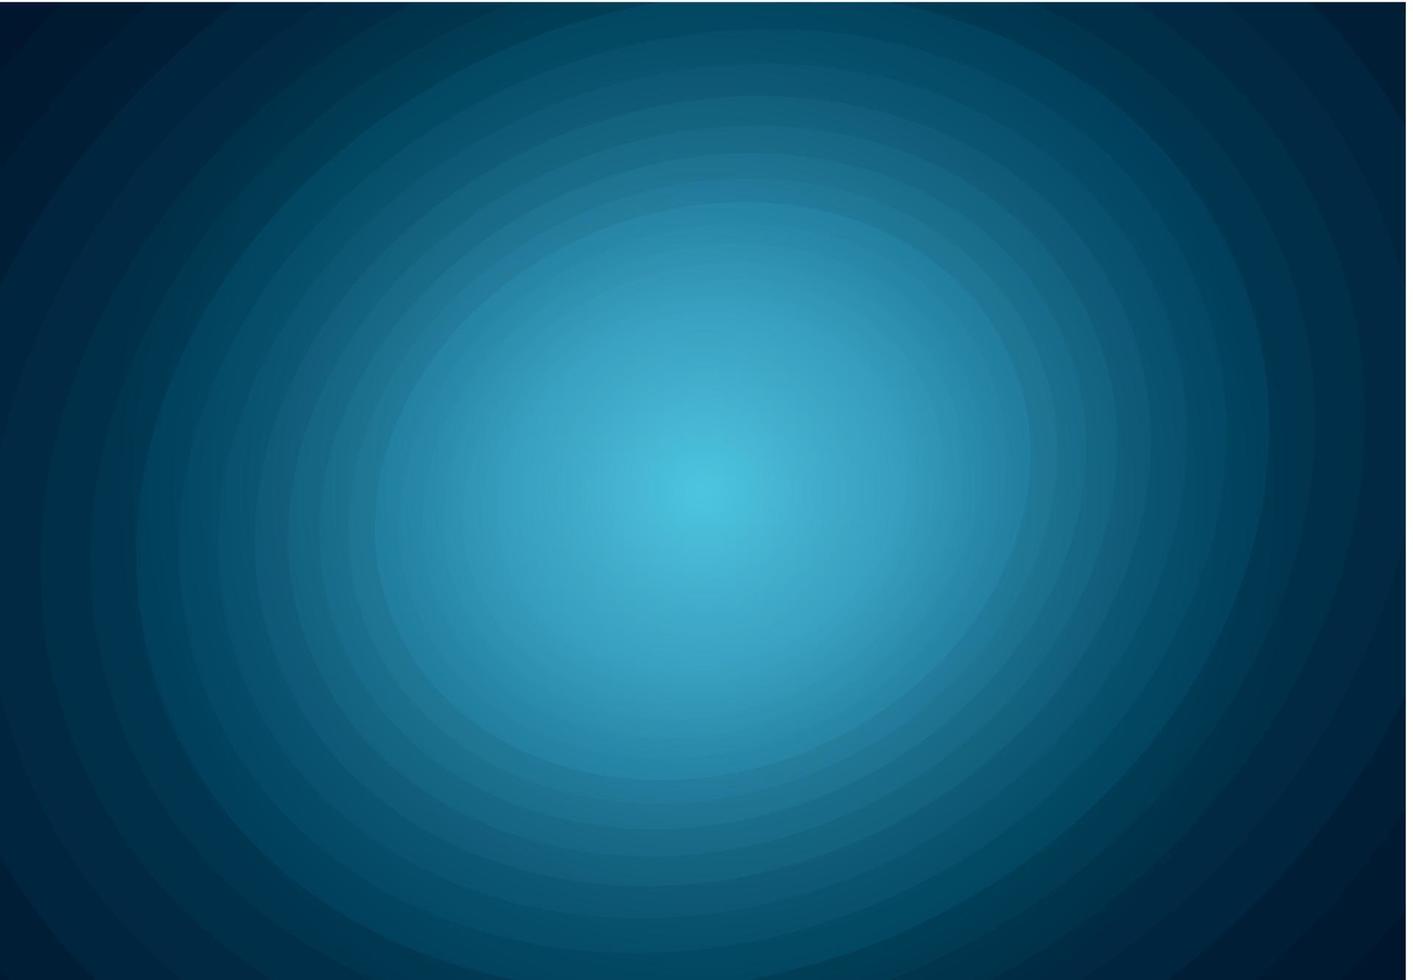 Abstract oval blue gradient background have blank space vector